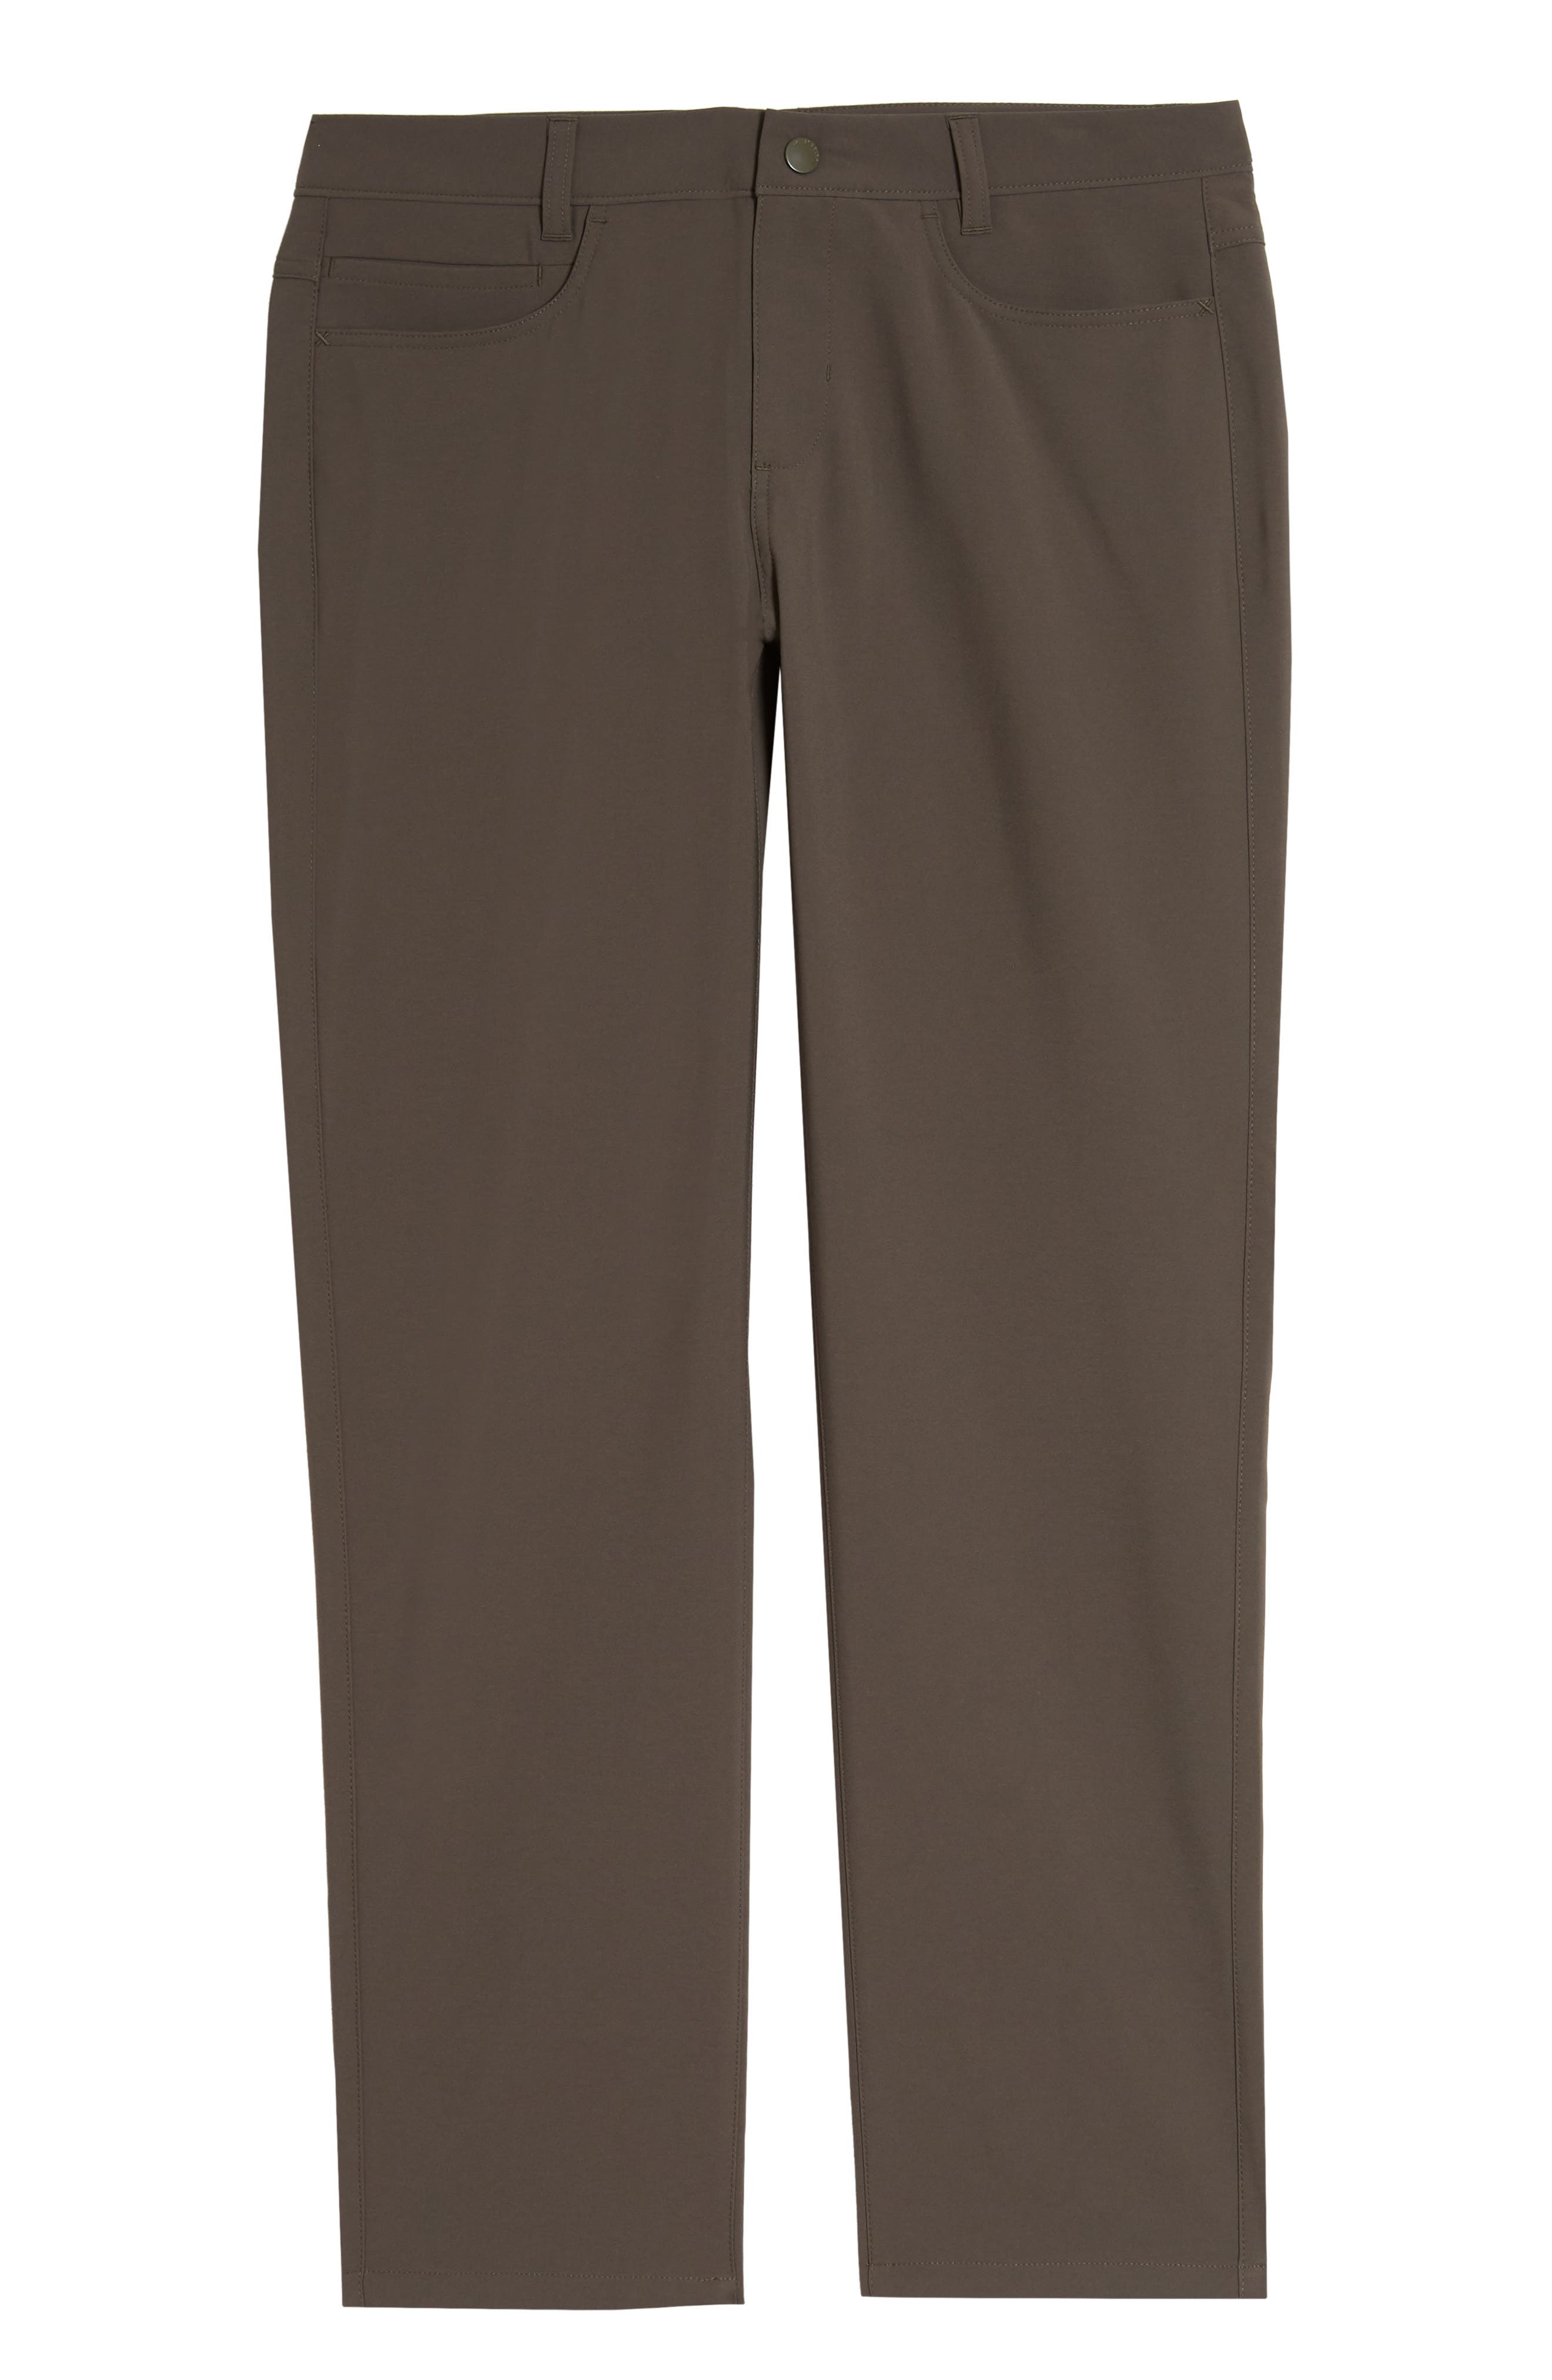 Cutter & Buck Transit Chino Pants, Size 38 X 32 In Poplar At Nordstrom